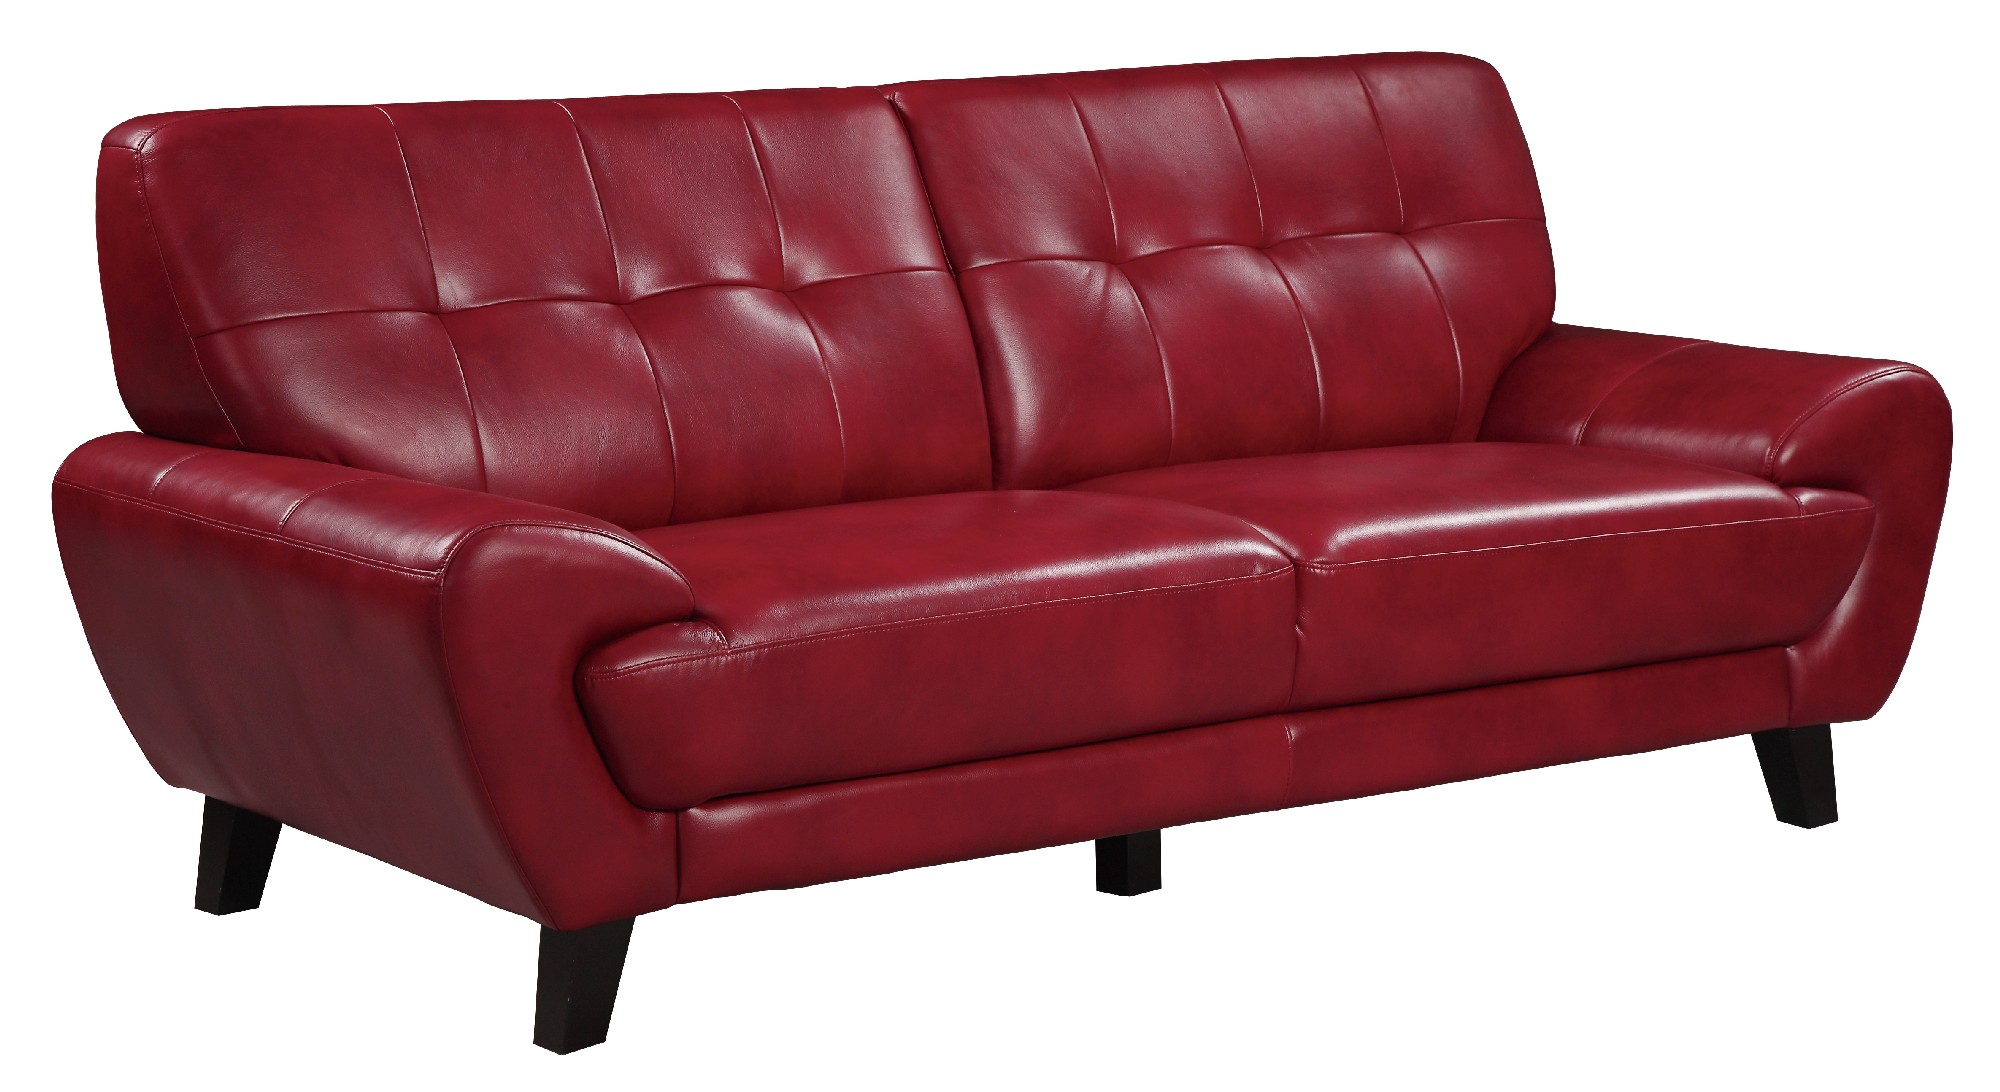 leather gel sofa review